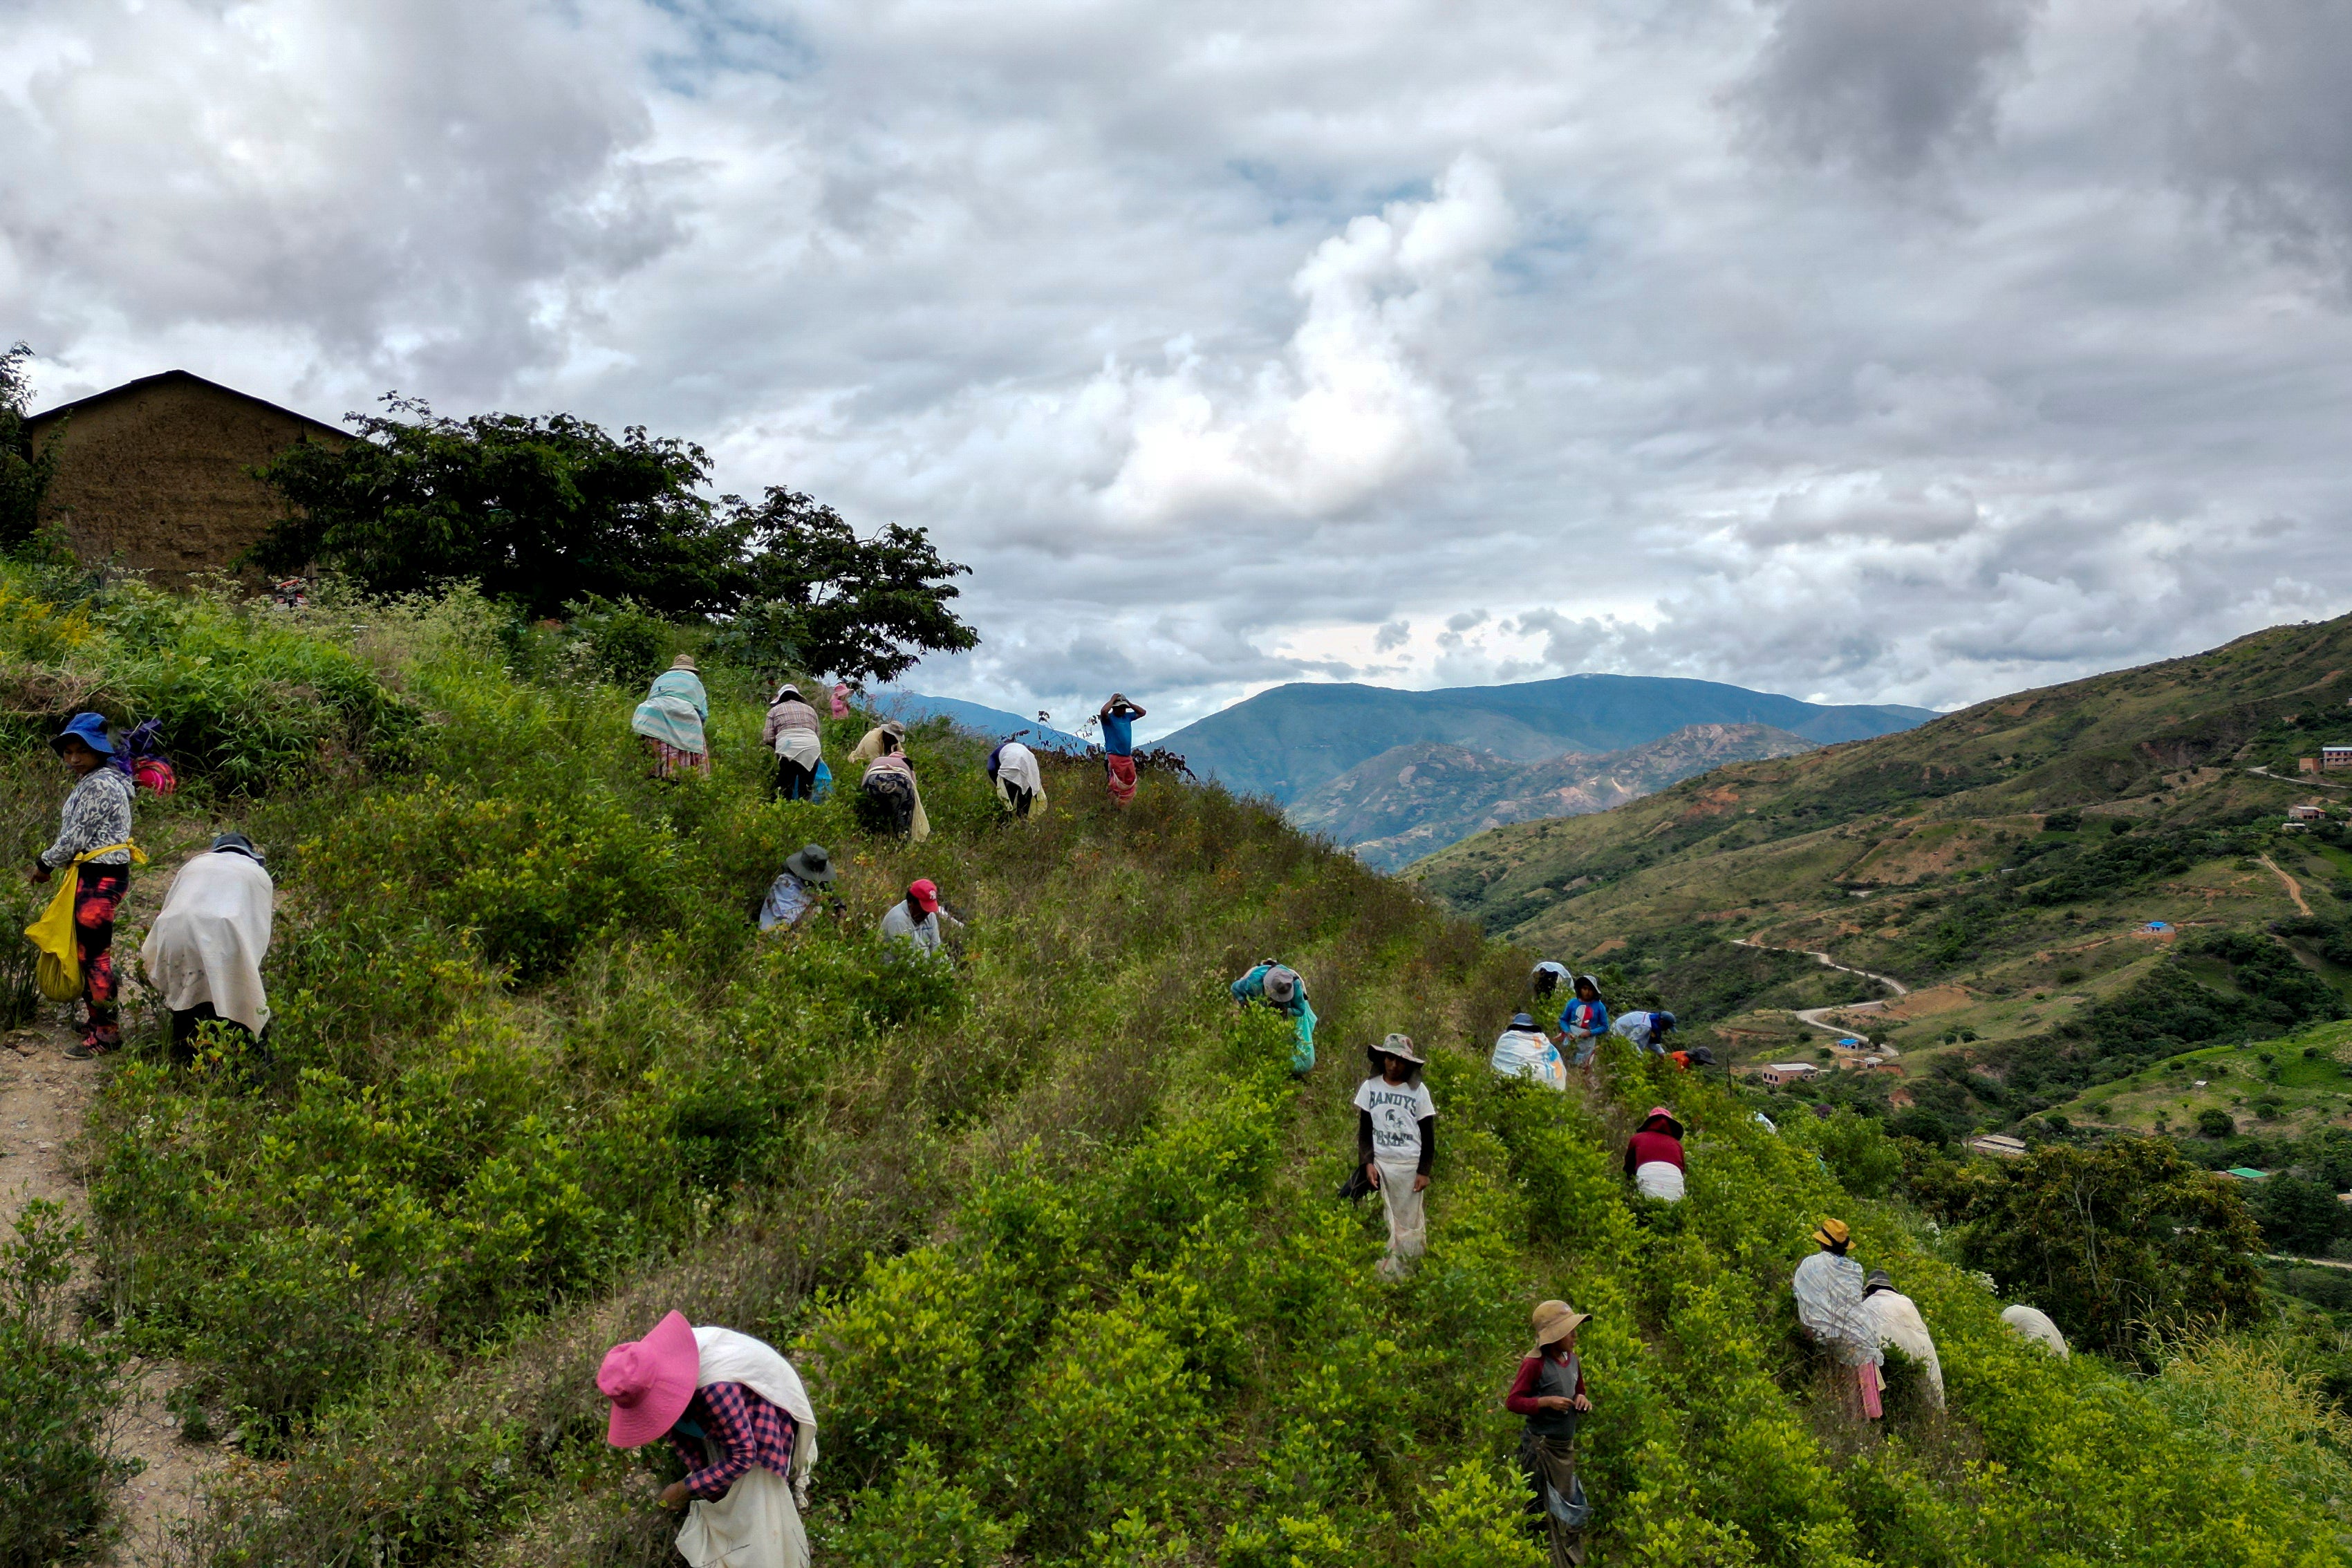 Farmers harvest coca leaves in Los Yungas, on the outskirts of Trinidad Pampa, a coca-producing area of Bolivia